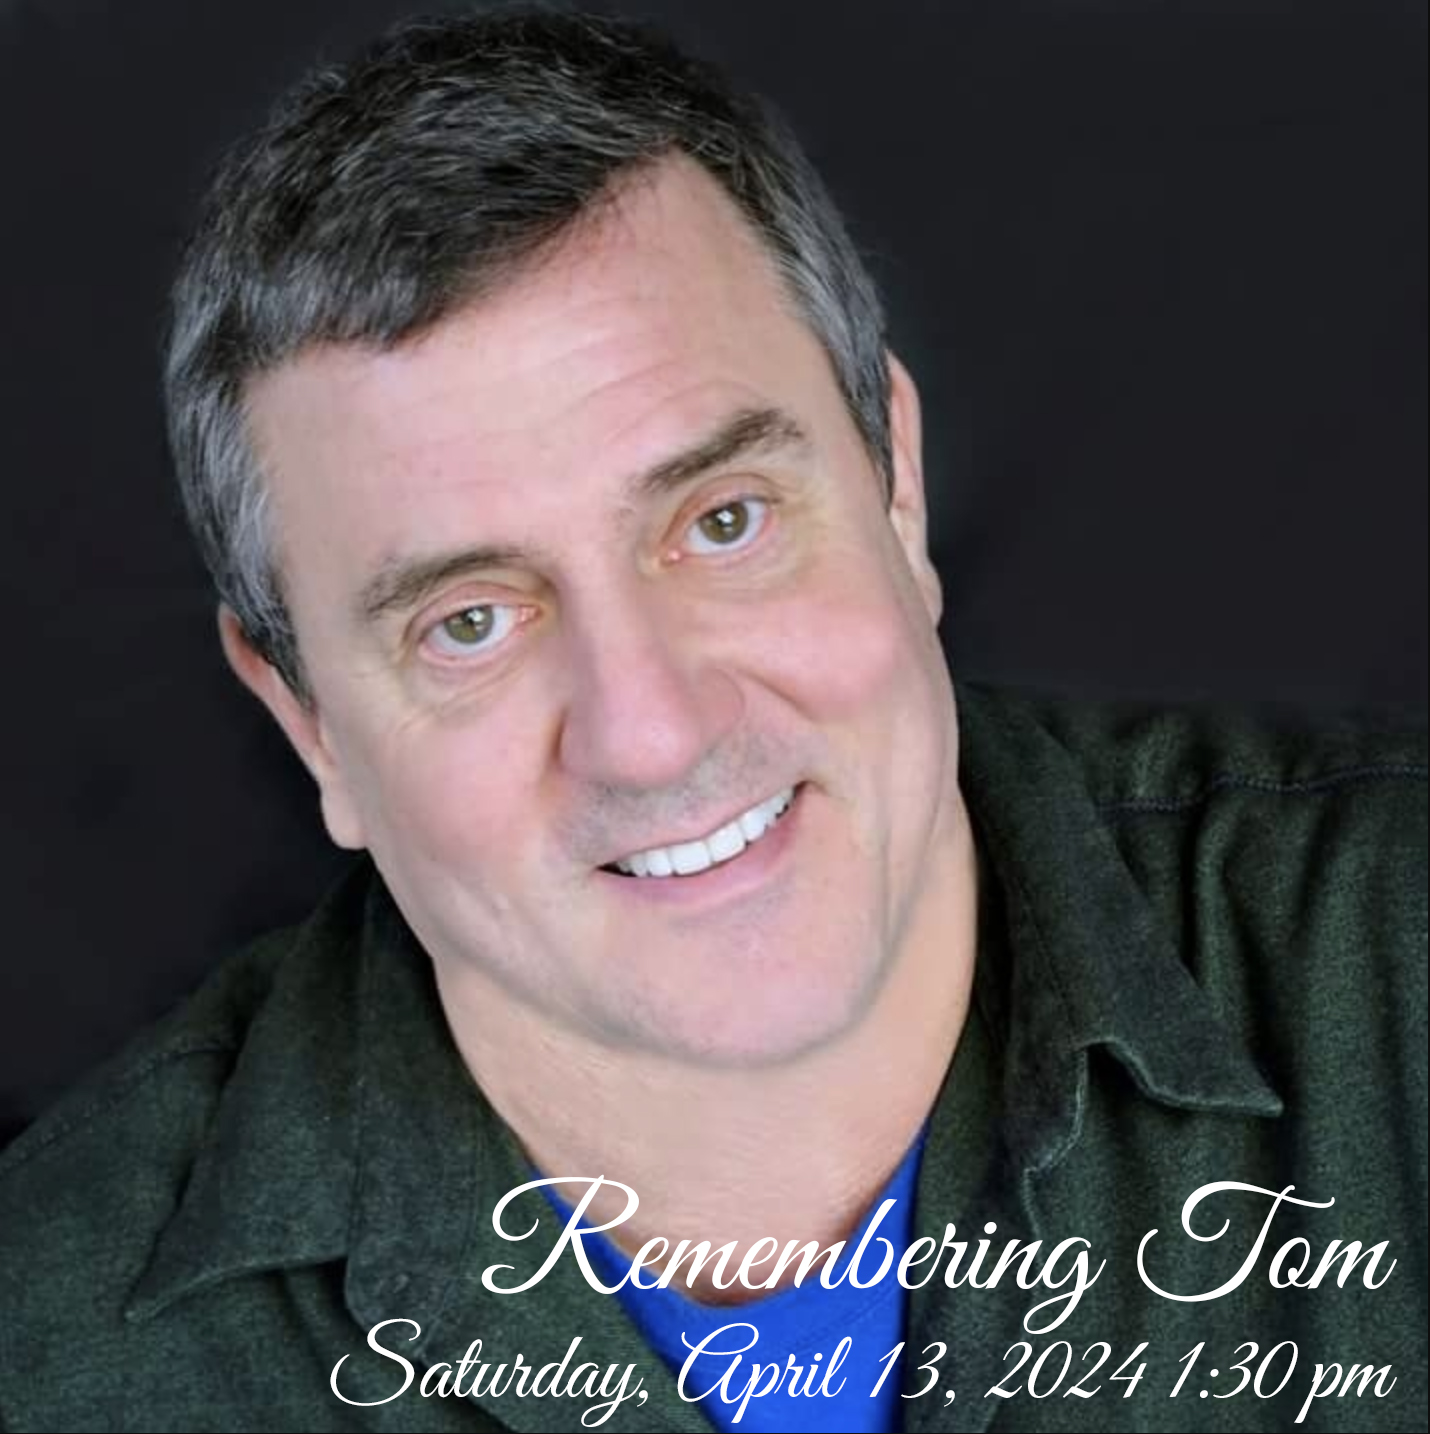 A memorial for our beloved friend and Professor, Tom Provenzano, will take place Saturday, April 13, 2024 from 1:30-3:30 p.m. in the CSUSB Performing Arts Recital Hall.